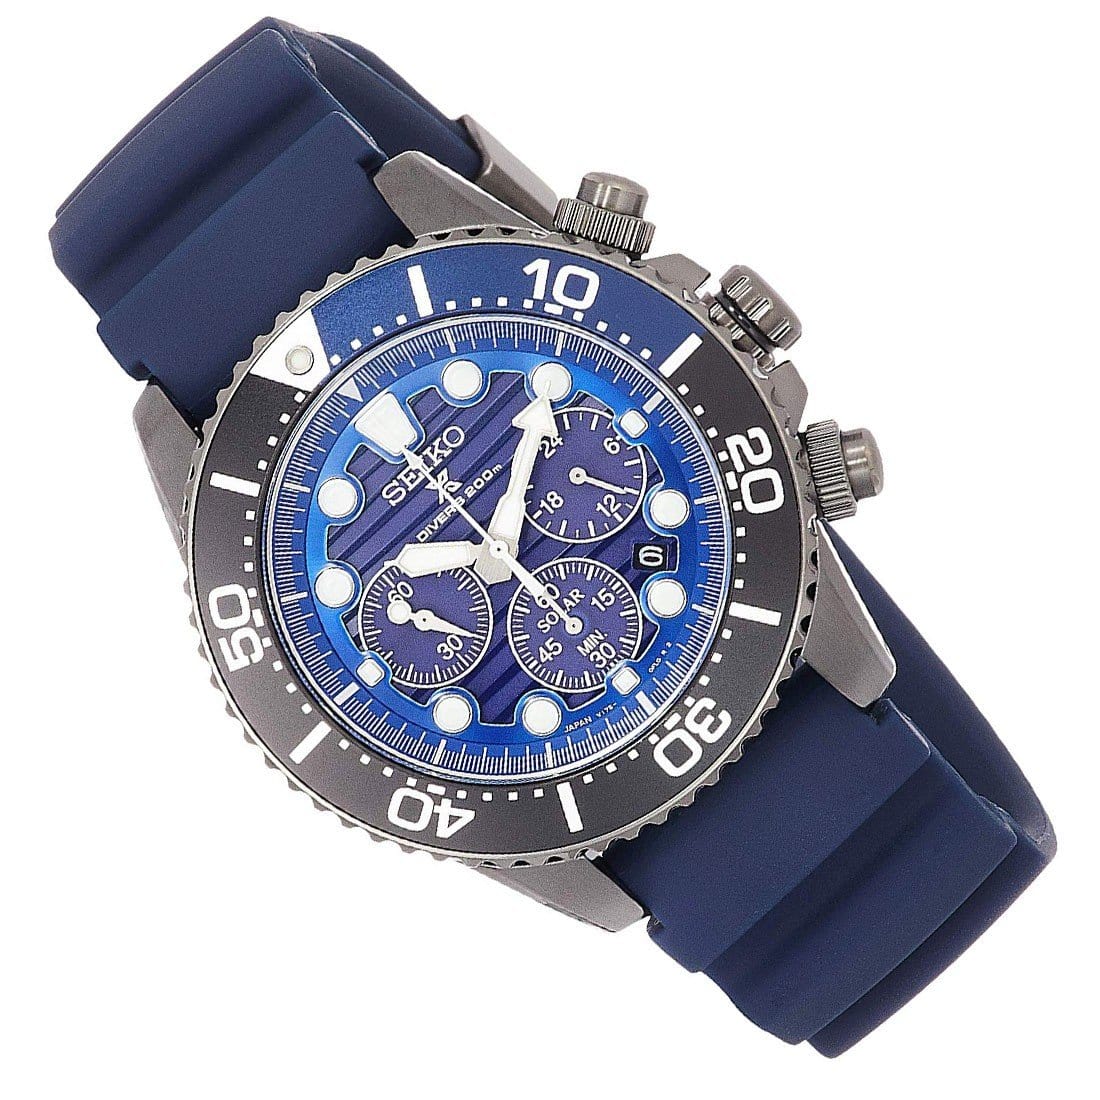 SBDL057 Seiko Prospex Save The Ocean Solar Chronograph Male Divers Watch